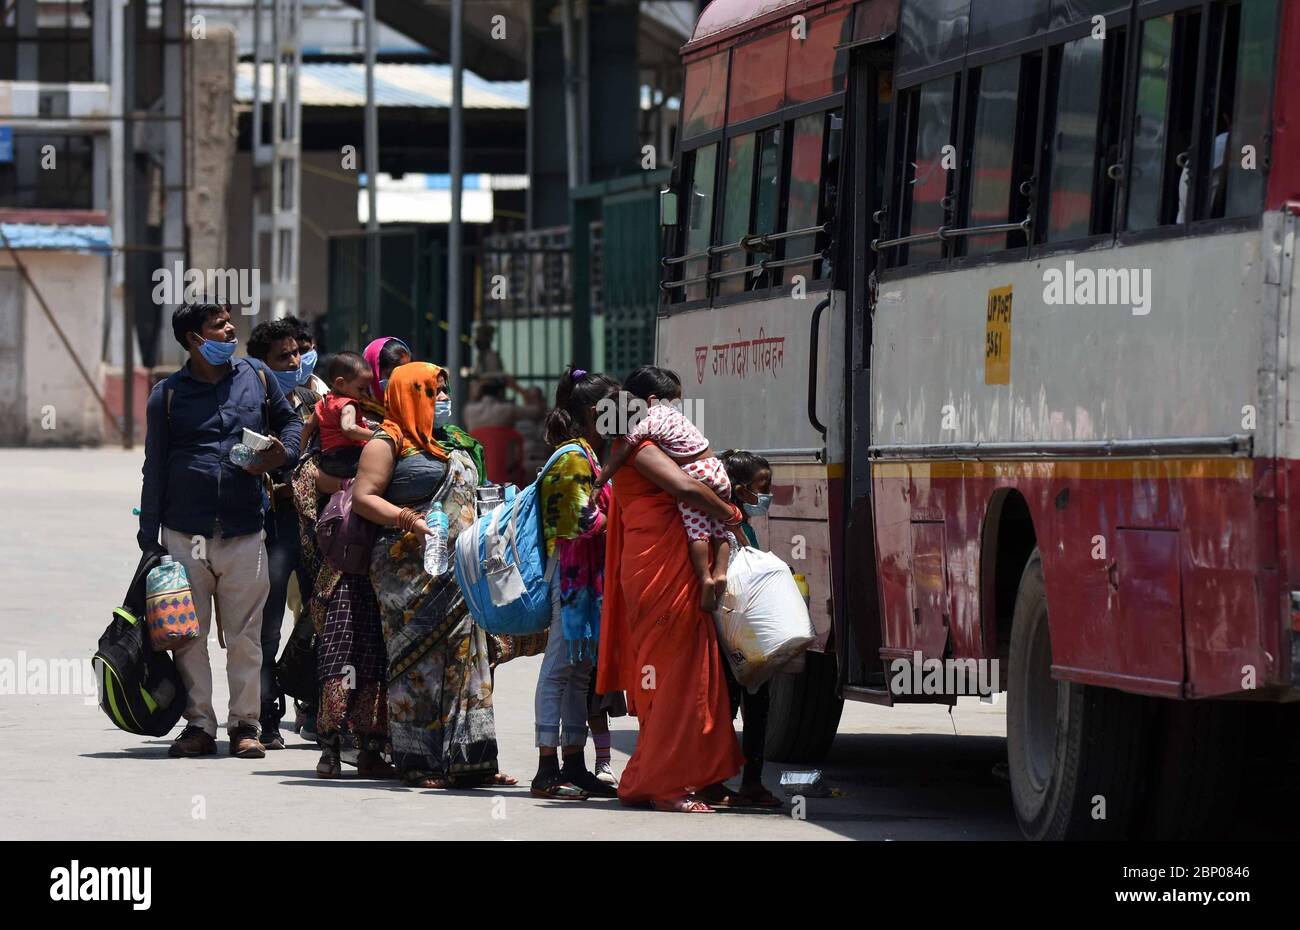 Prayagraj, Uttar Pradesh, India. 17th May, 2020. Prayagraj: Migrants from Surat, Gujrat board buses to arrive their native village after they arrived by a special train at Prayagraj Junction during a government-imposed nationwide lockdown as a preventive measure against coronavirus, in Prayagraj on May 17, 2020. Credit: Prabhat Kumar Verma/ZUMA Wire/Alamy Live News Stock Photo